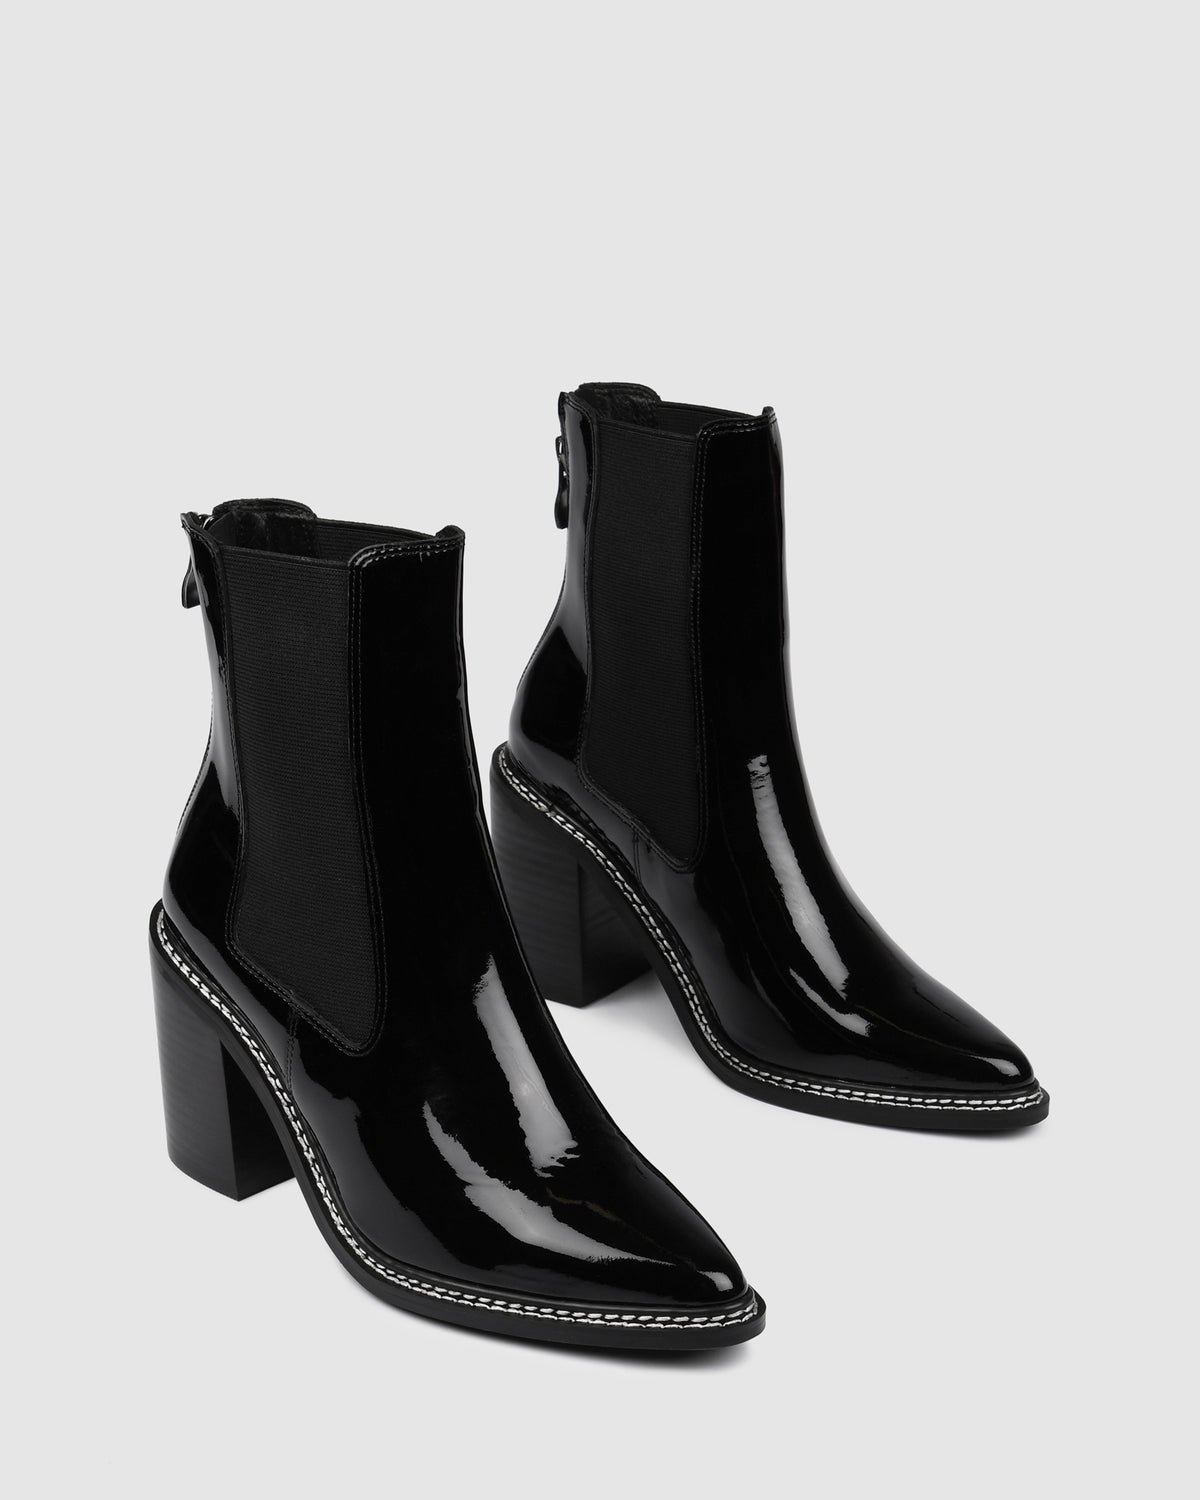 LUXE HIGH ANKLE BOOTS BLACK PATENT Jo